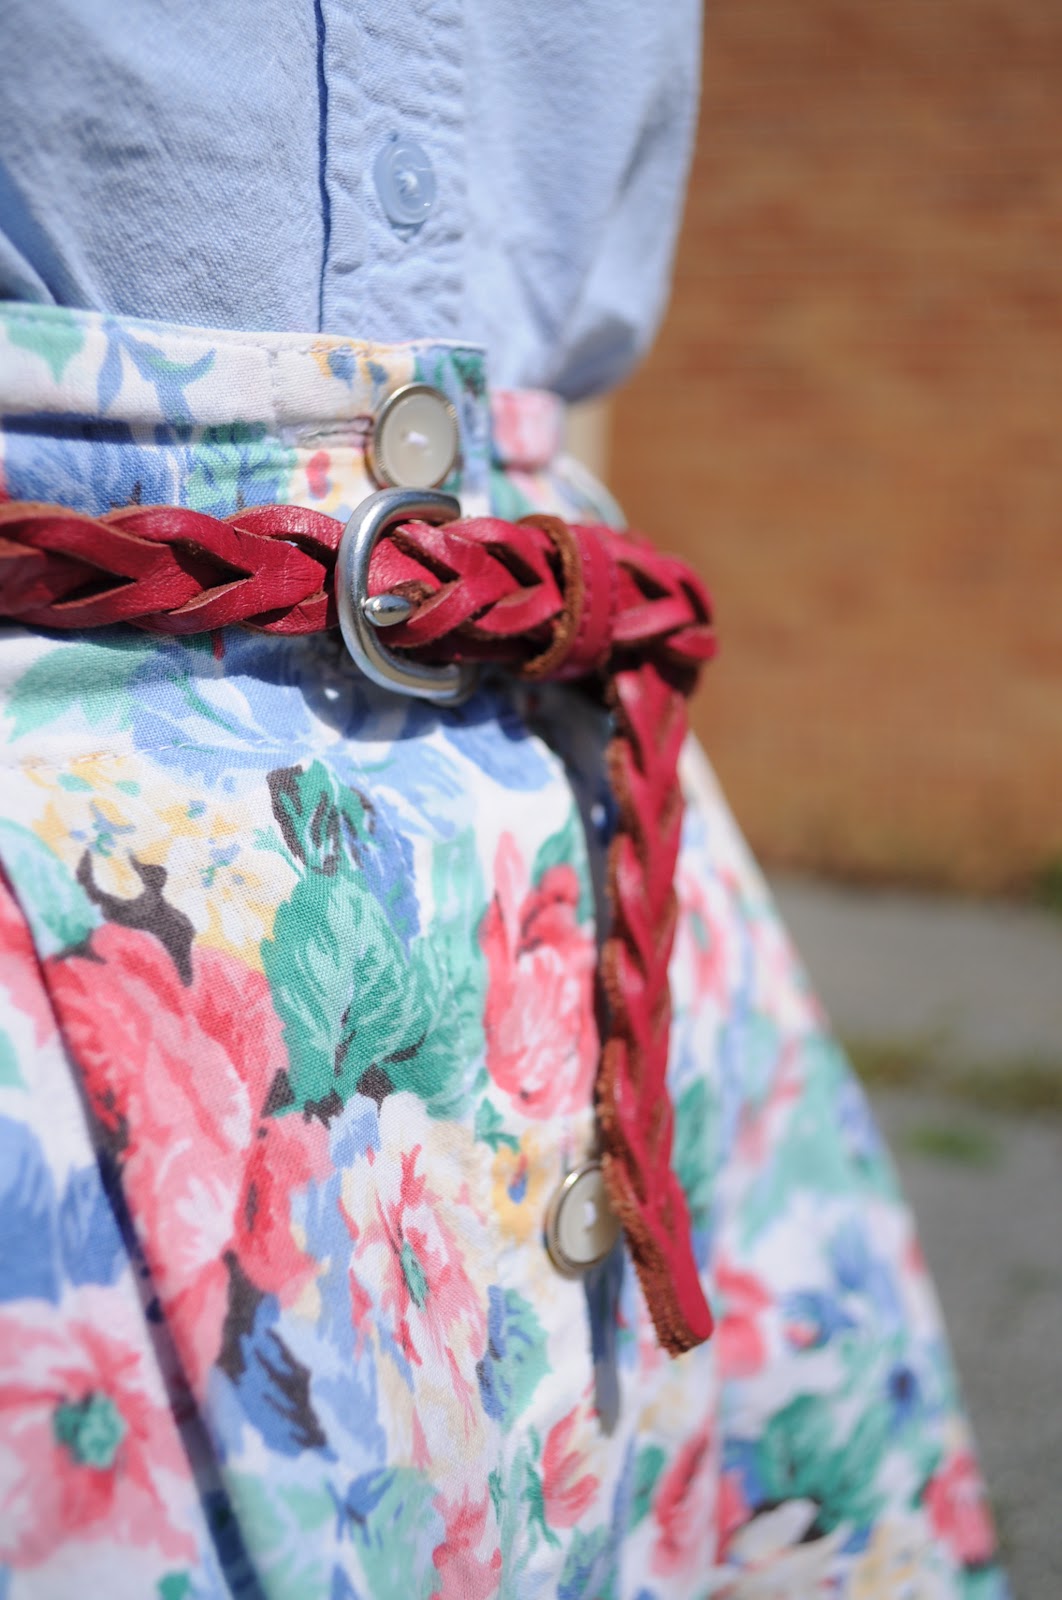 Fashion for Sanity: Upcycled: Floral Skirt